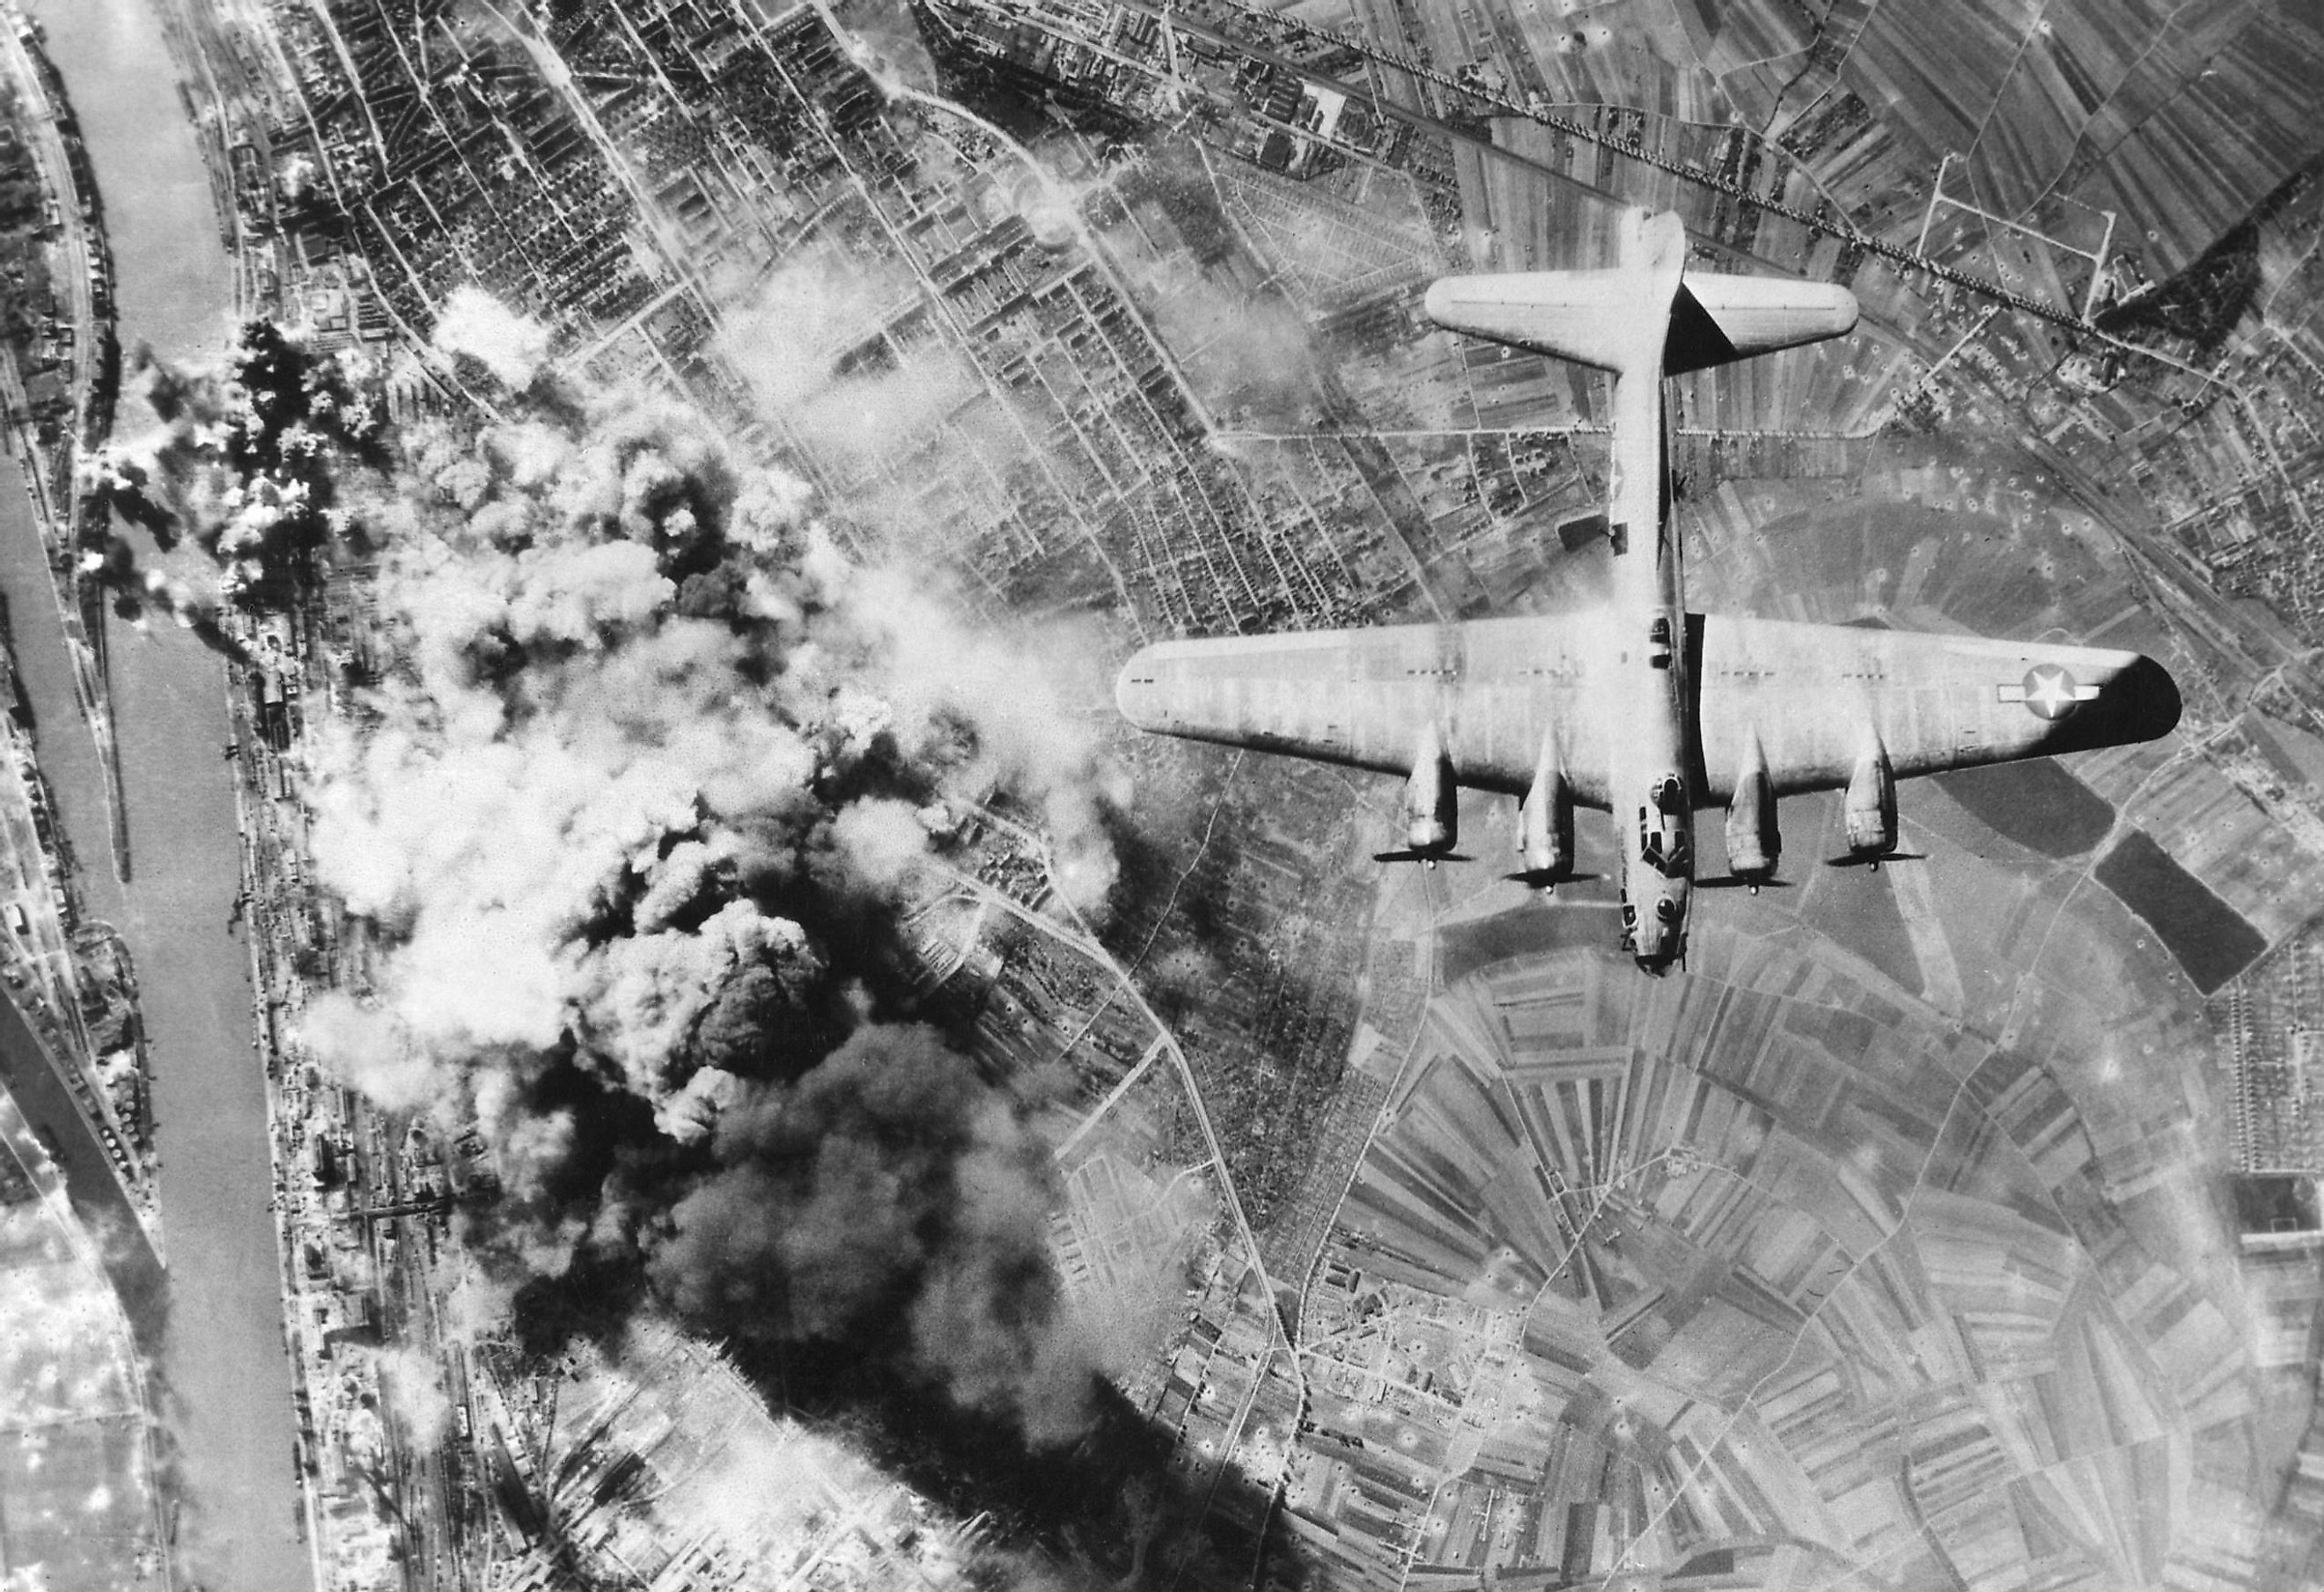 American B-17 flying fortresses bombs Ludwigshafen chemical and synthetic oil works, Germany.  Editorial credit: Everett Collection / Shutterstock.com